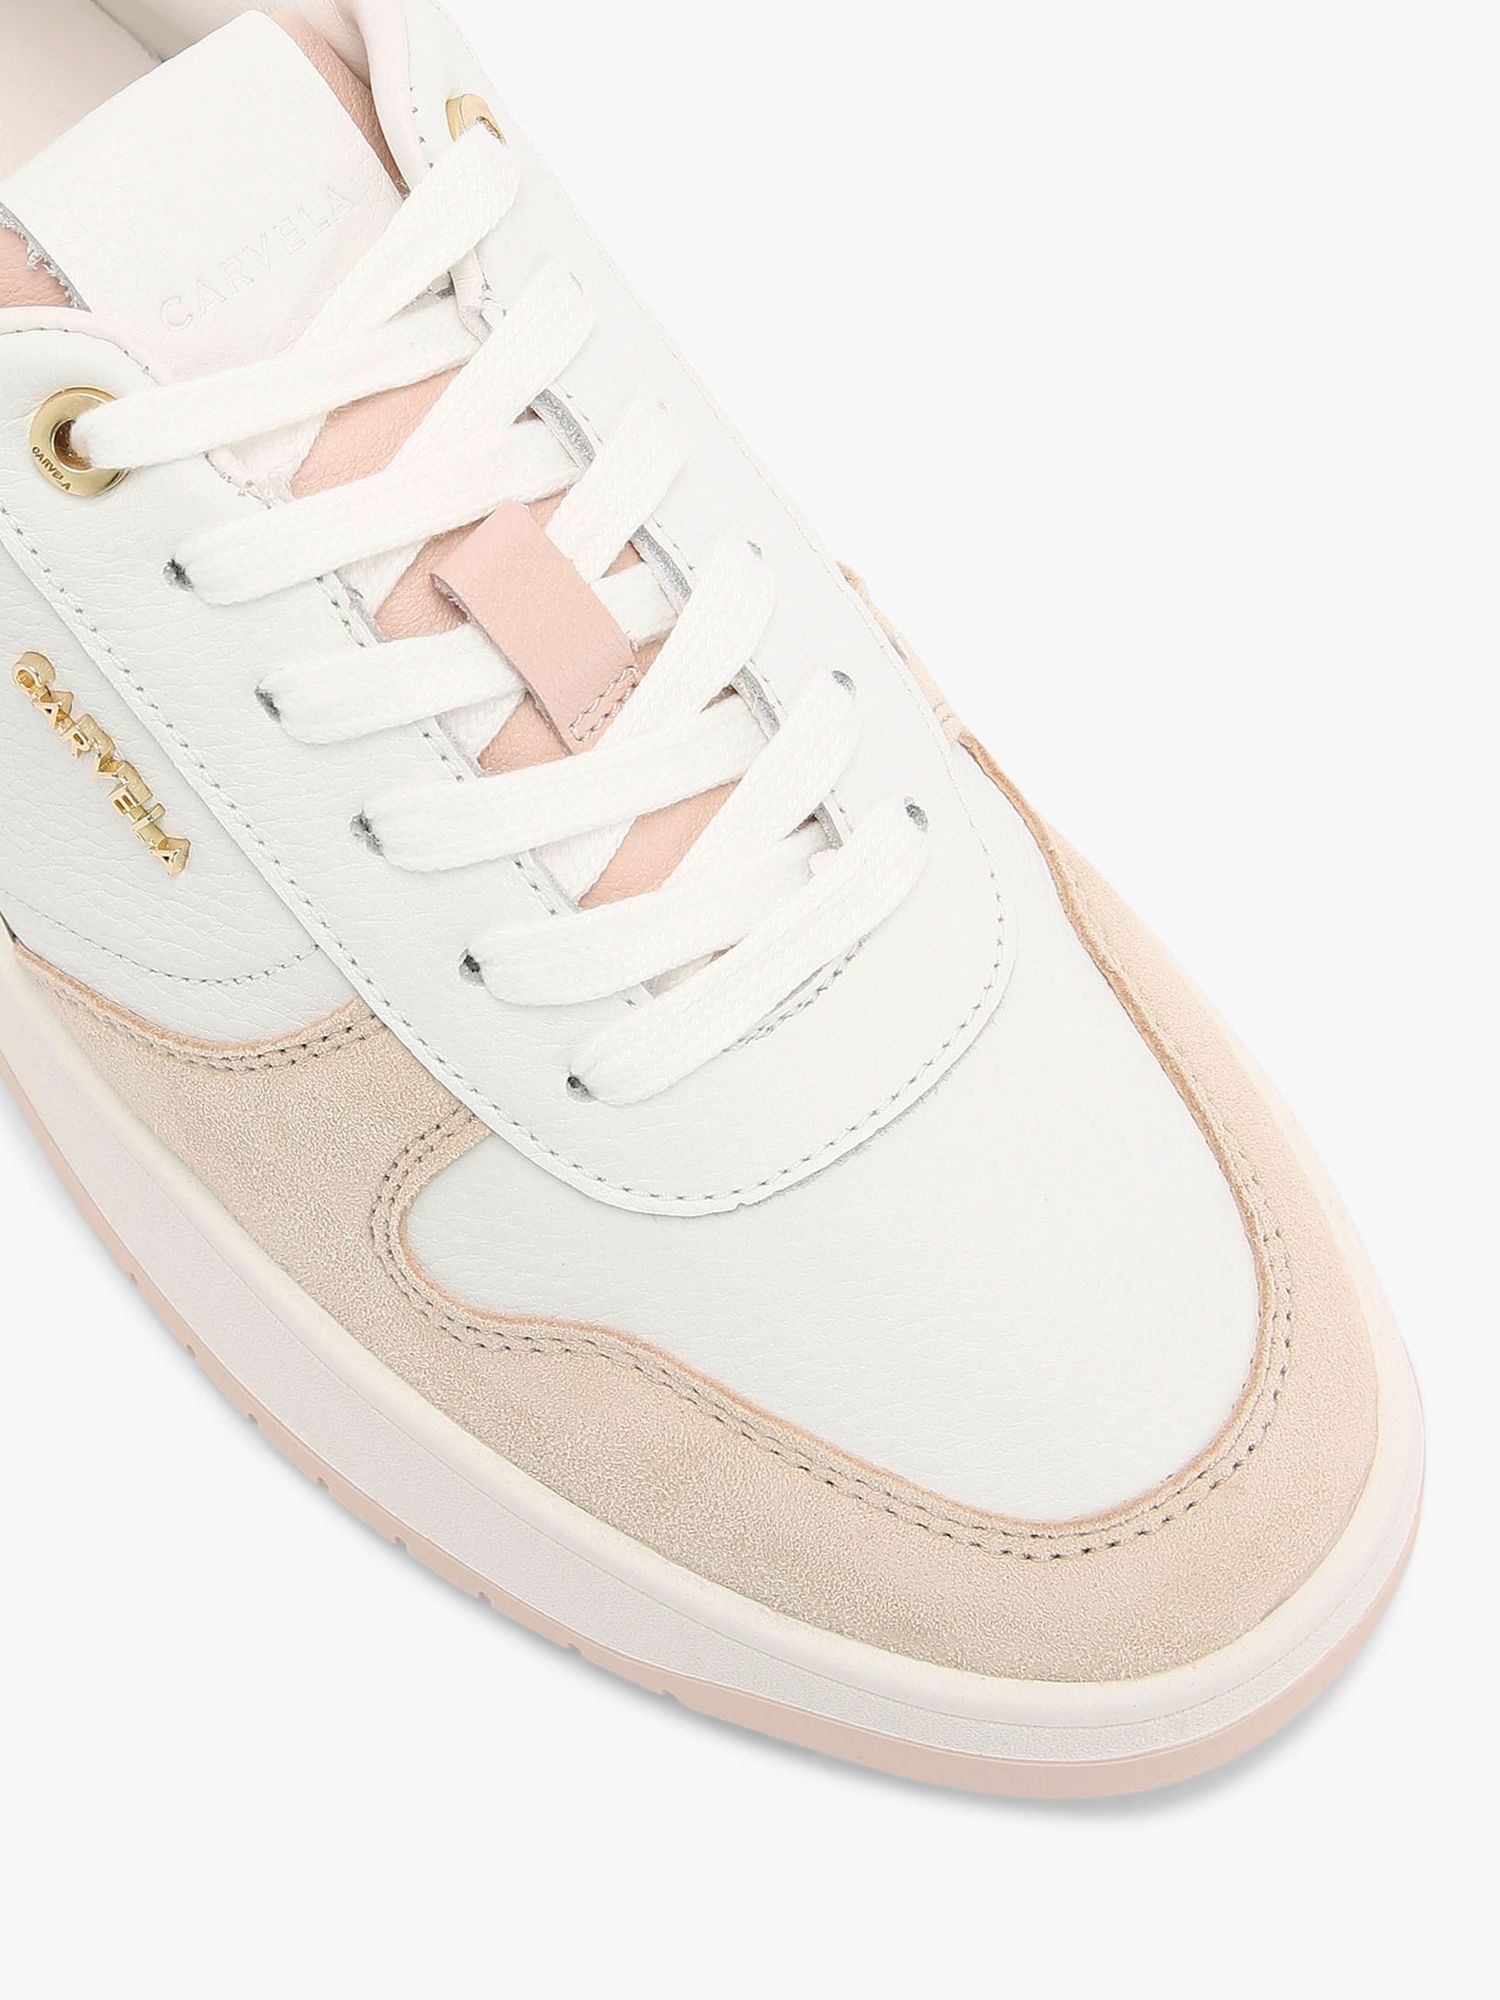 Buy Carvela Charm Leather Trainers Online at johnlewis.com